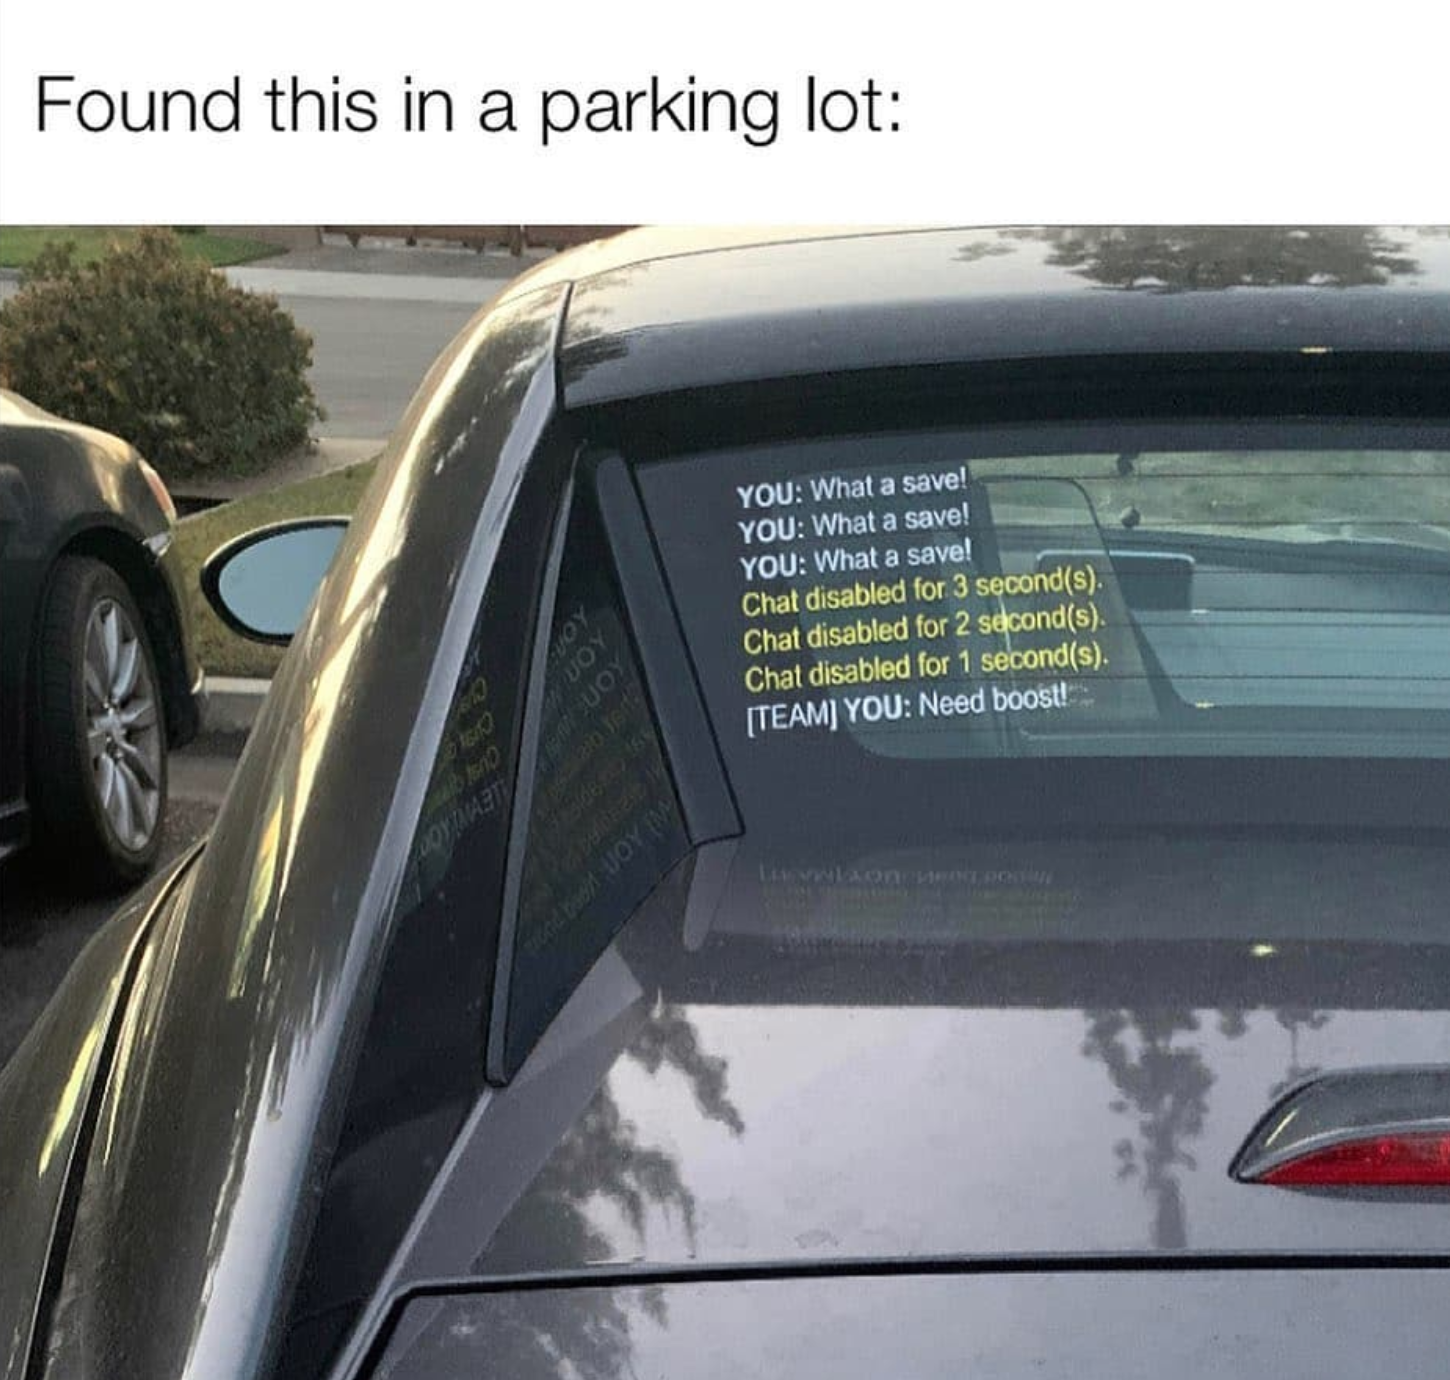 funny gaming memes - windshield - Found this in a parking lot You What a save! You What a savel You What a save! Chat disabled for 3 seconds Chat disabled for 2 seconds. Chat disabled for 1 seconds. Team You Need boost Sss